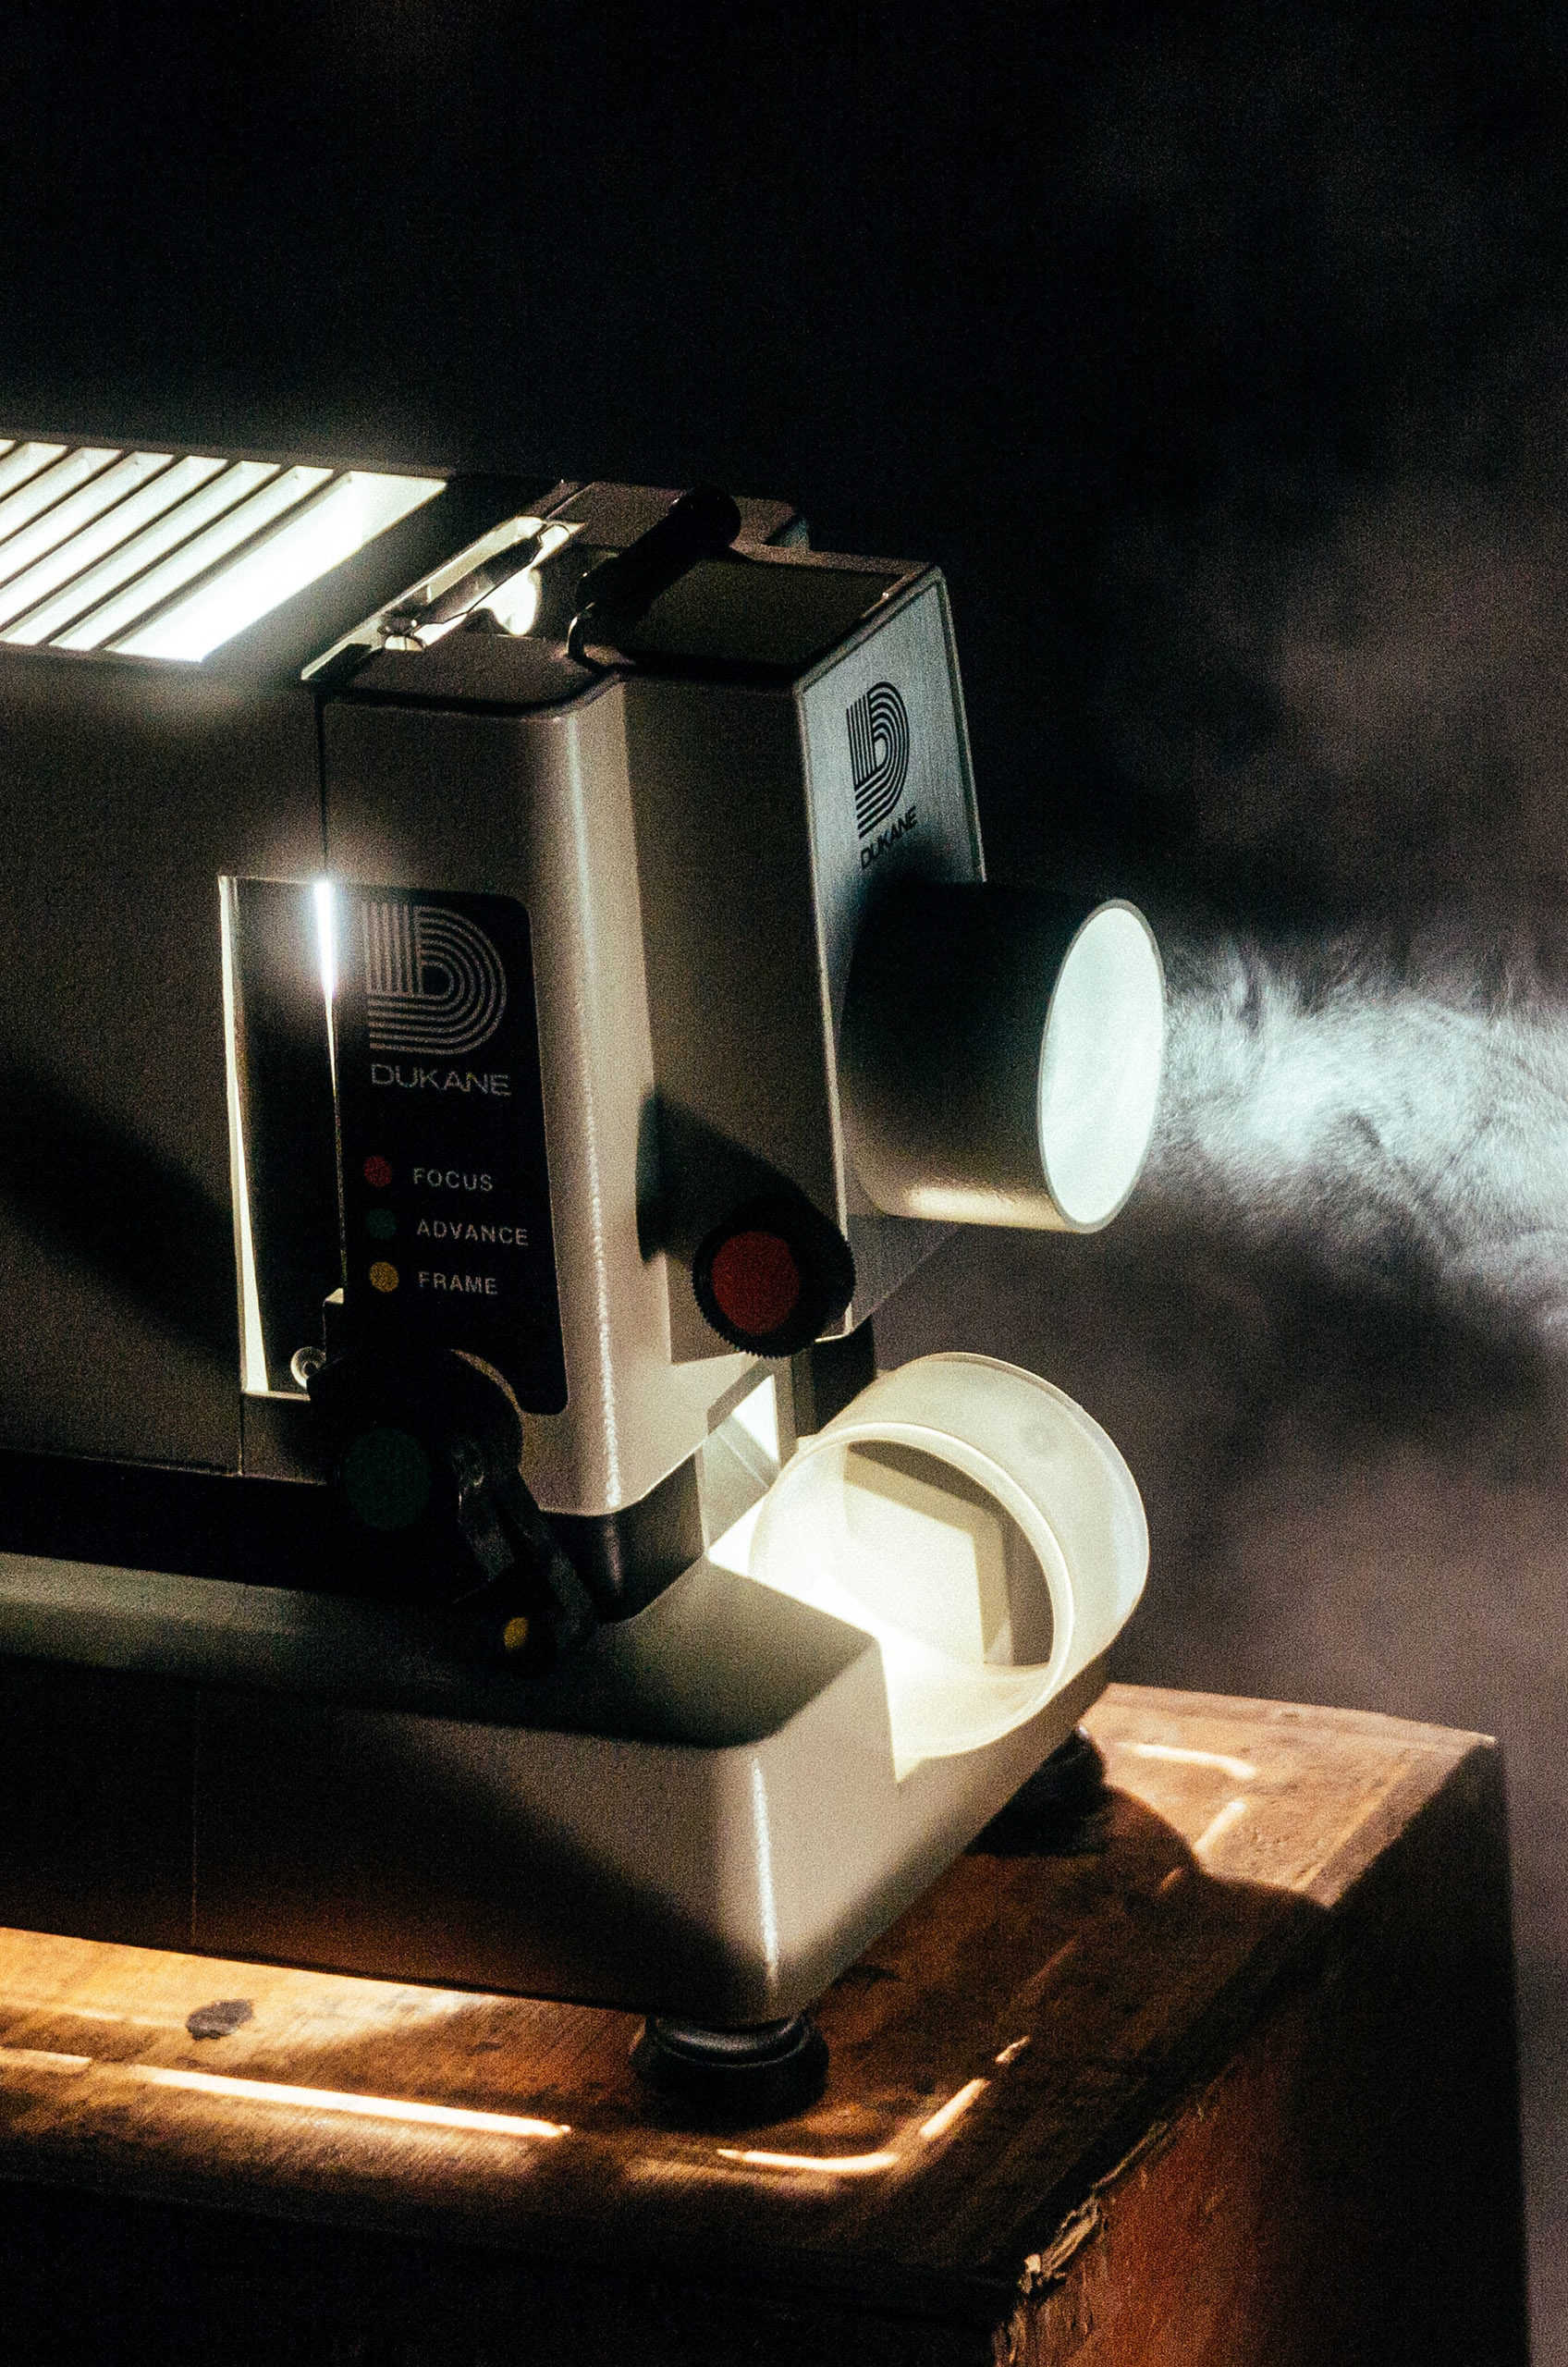 Image of a projector.